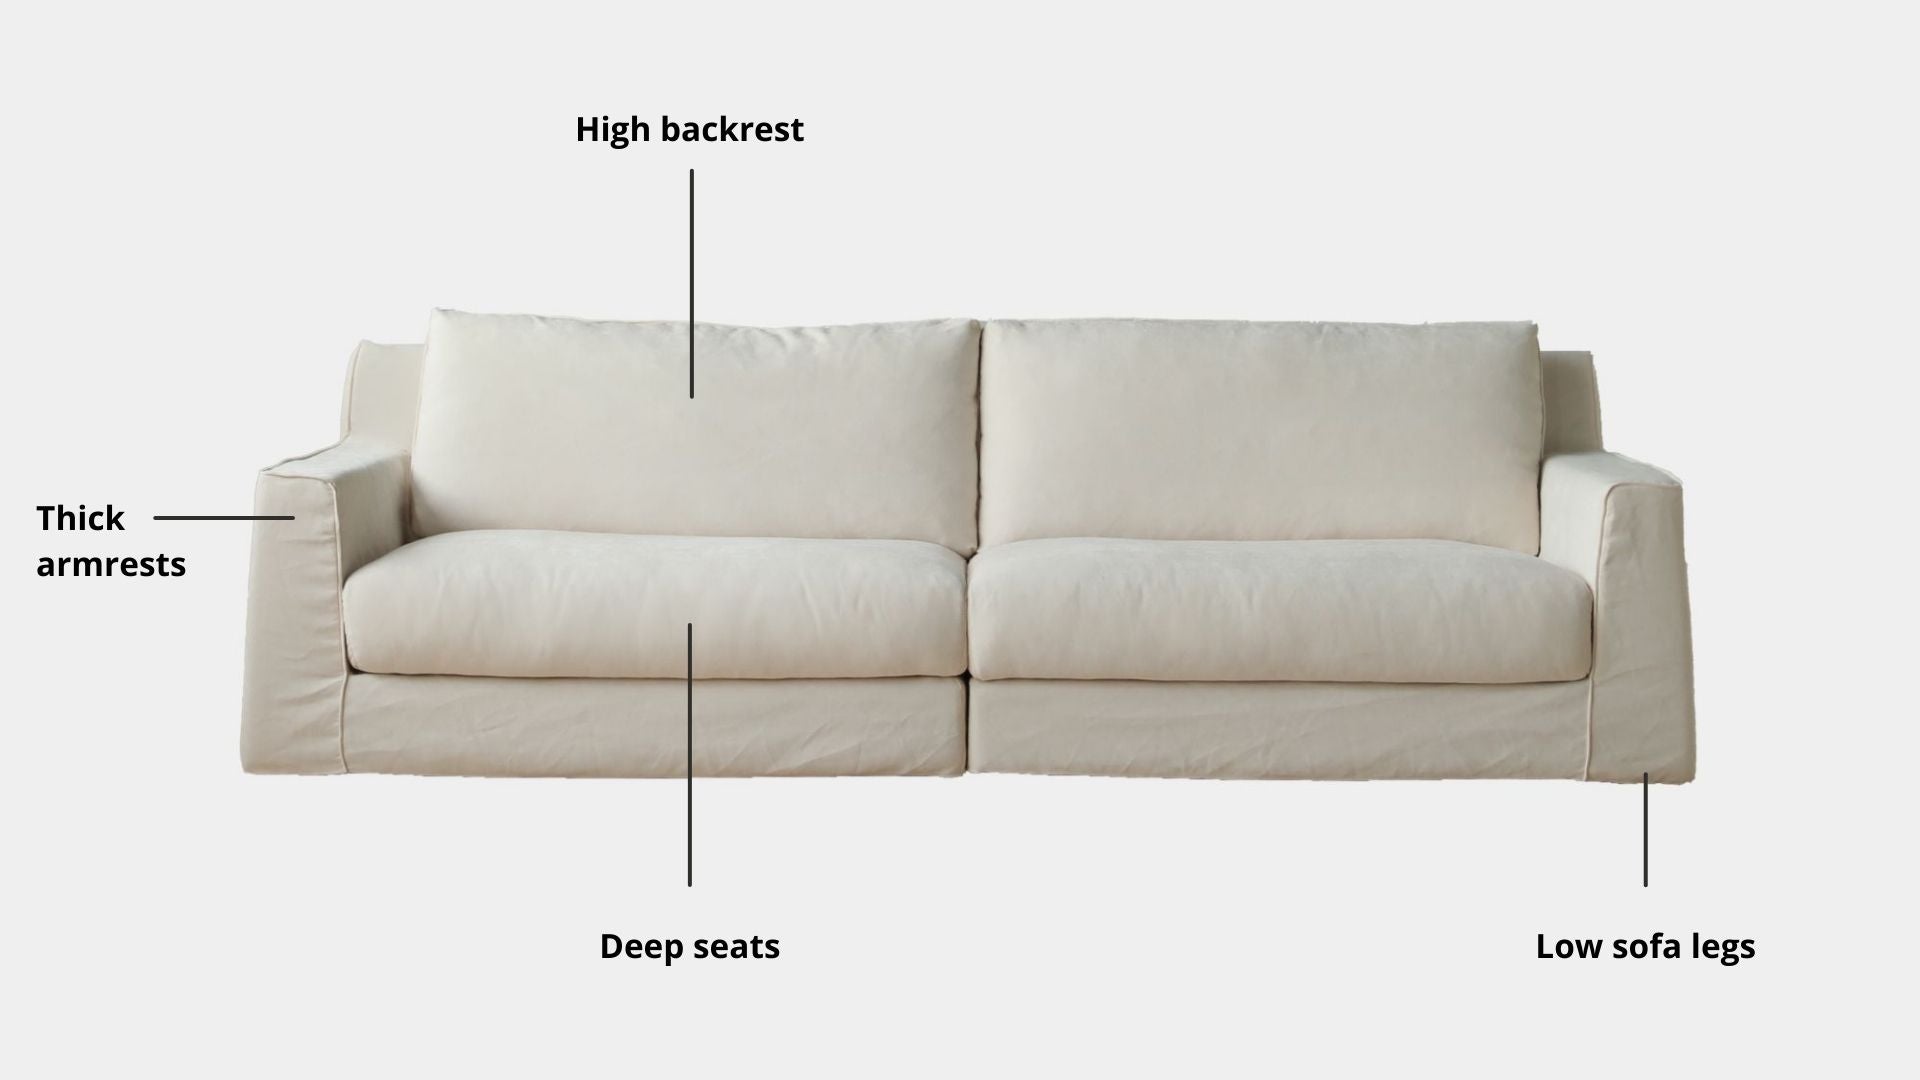 Key features such as armrest thickness, cushion height, seat depth and sofa leg height for Comfort Fabric Sofa